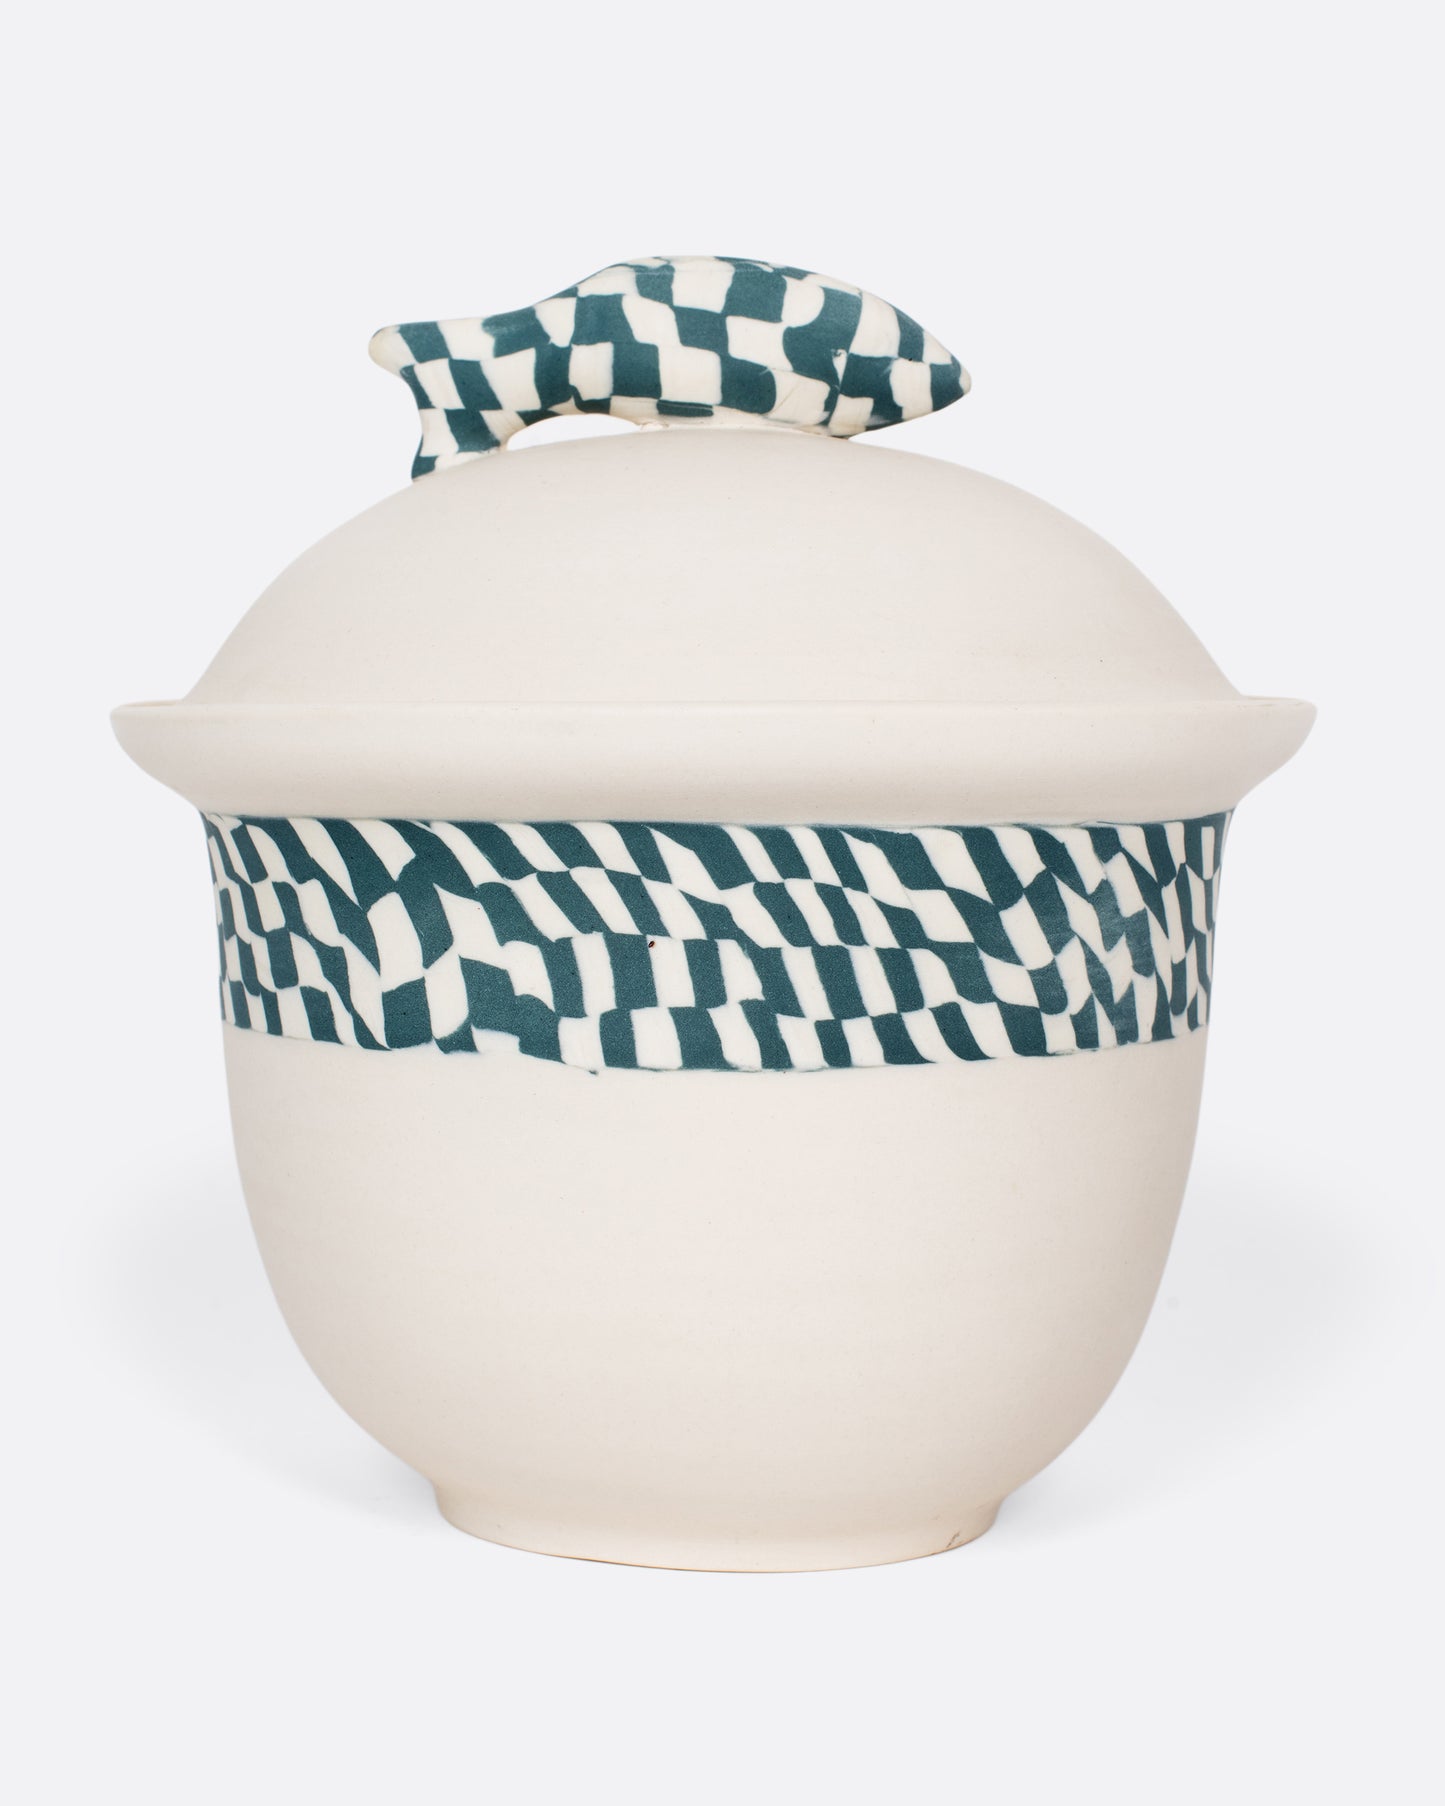 A vintage Nerikomi casserole dish with a blue and white checkered fish handle. The Japanese Nerikomi ceramic technique involves stacking and cutting colored pieces of clay, creating this beautiful checkered effect.